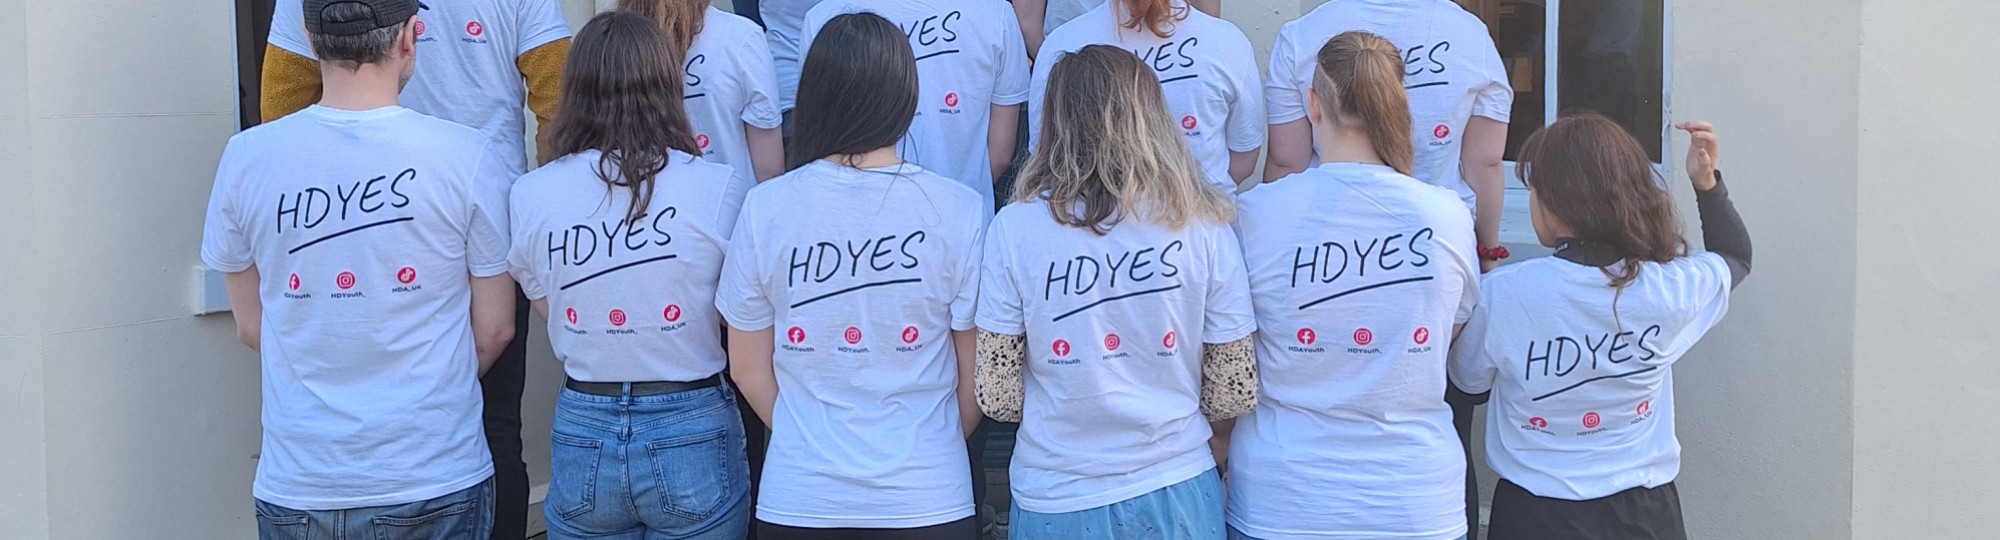 Youth Engagement Service (HDYES